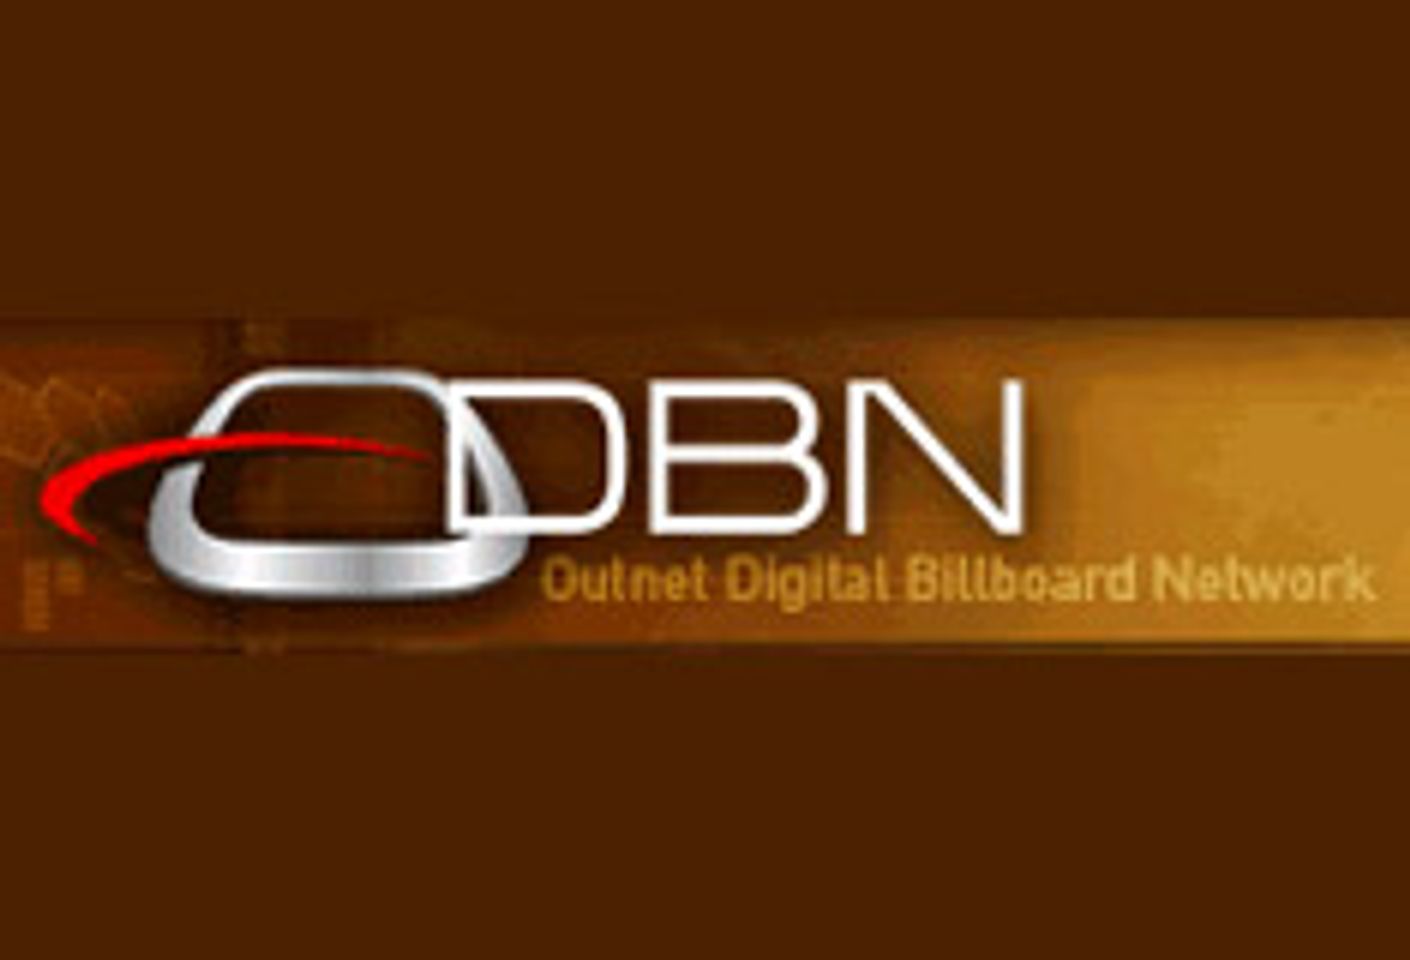 ODBN To Provide Retailers Free Adult Store Kiosk